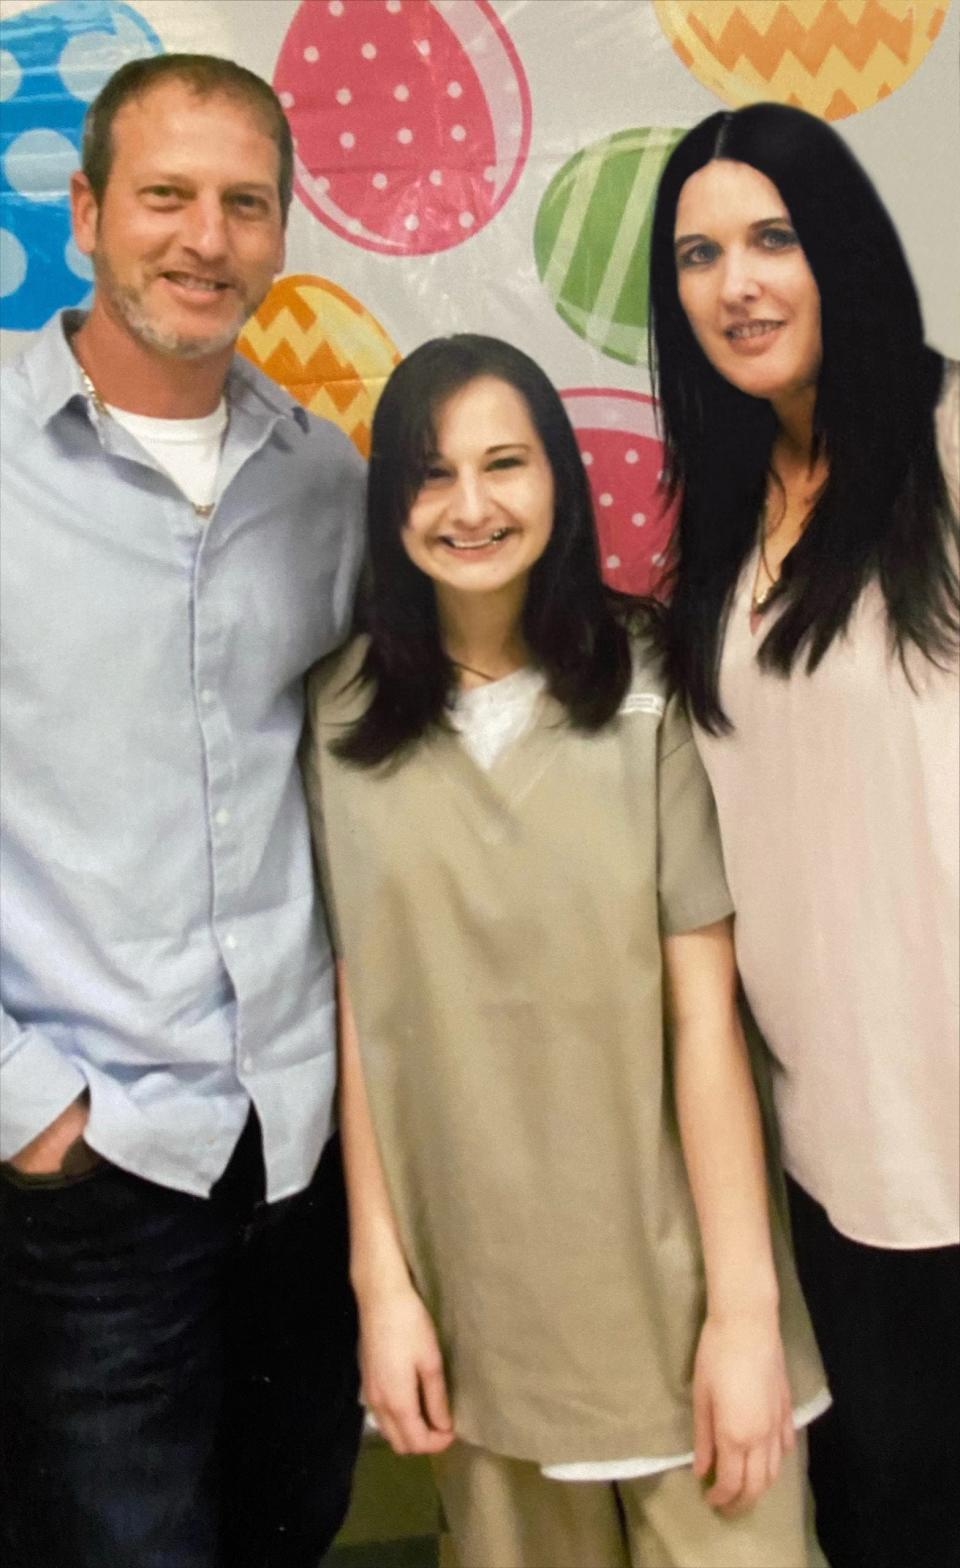 Gypsy Rose Blanchard, center, with her father Rod Blanchard and his wife, Kristy.